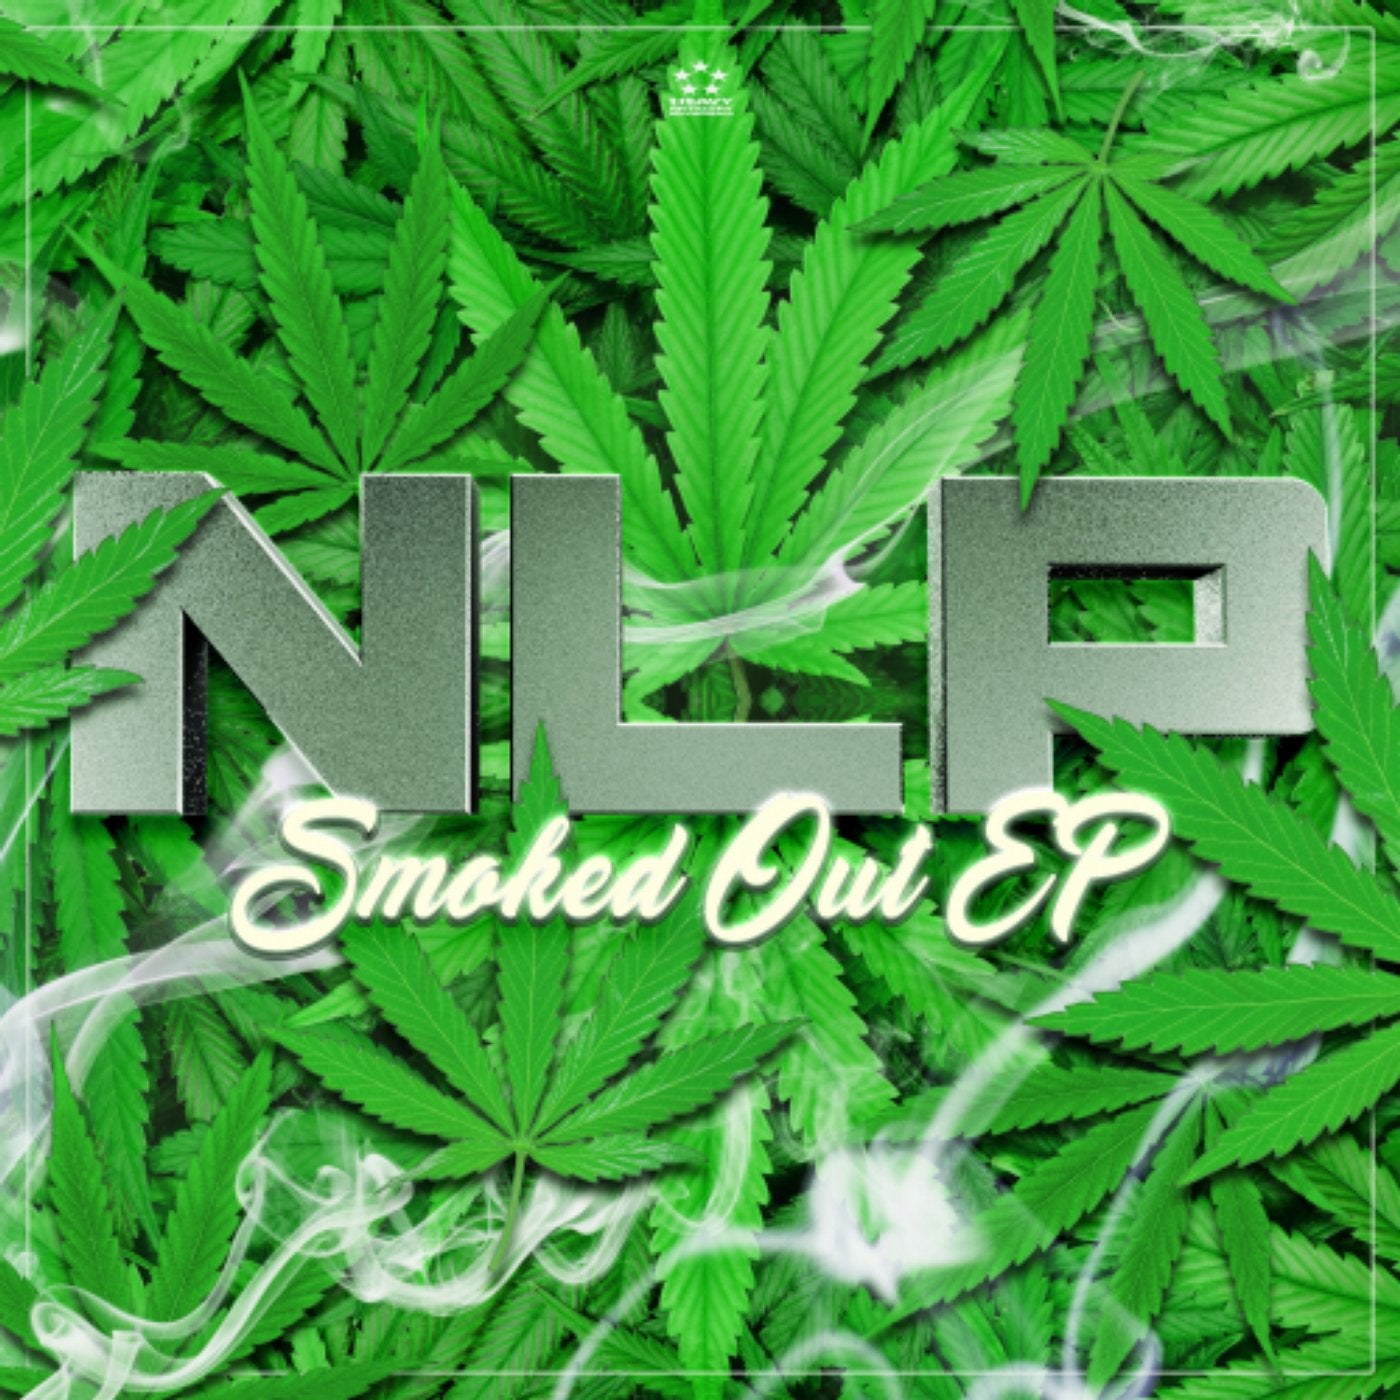 Smoked Out EP